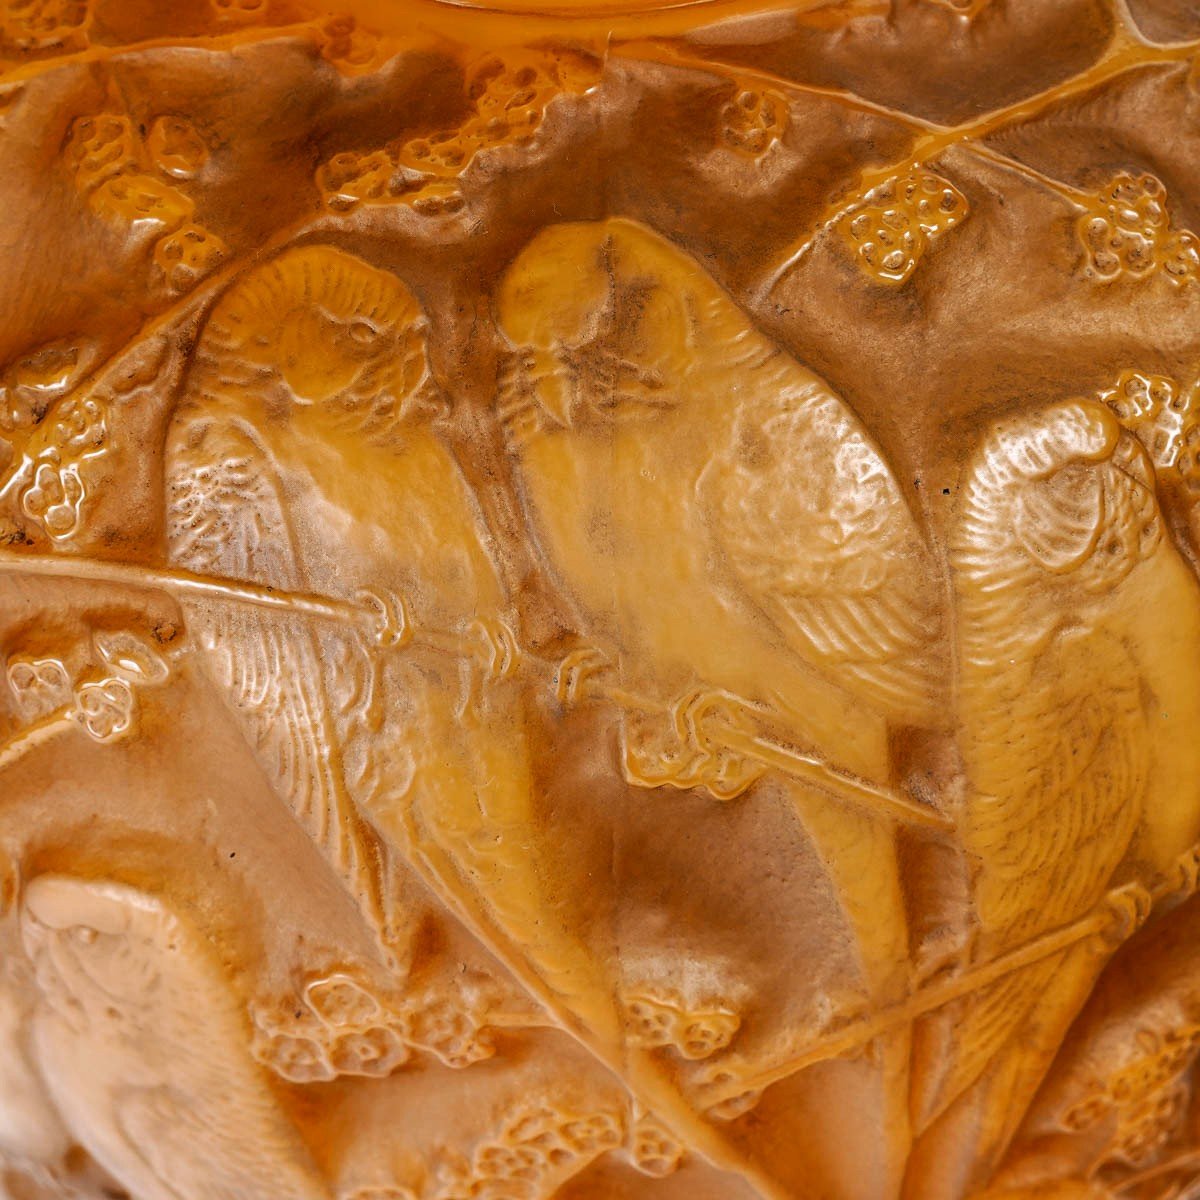 1919 Rene Lalique - Vase Perruches Parrots Cased Butterscotch Glass With Sepia Patina-photo-4